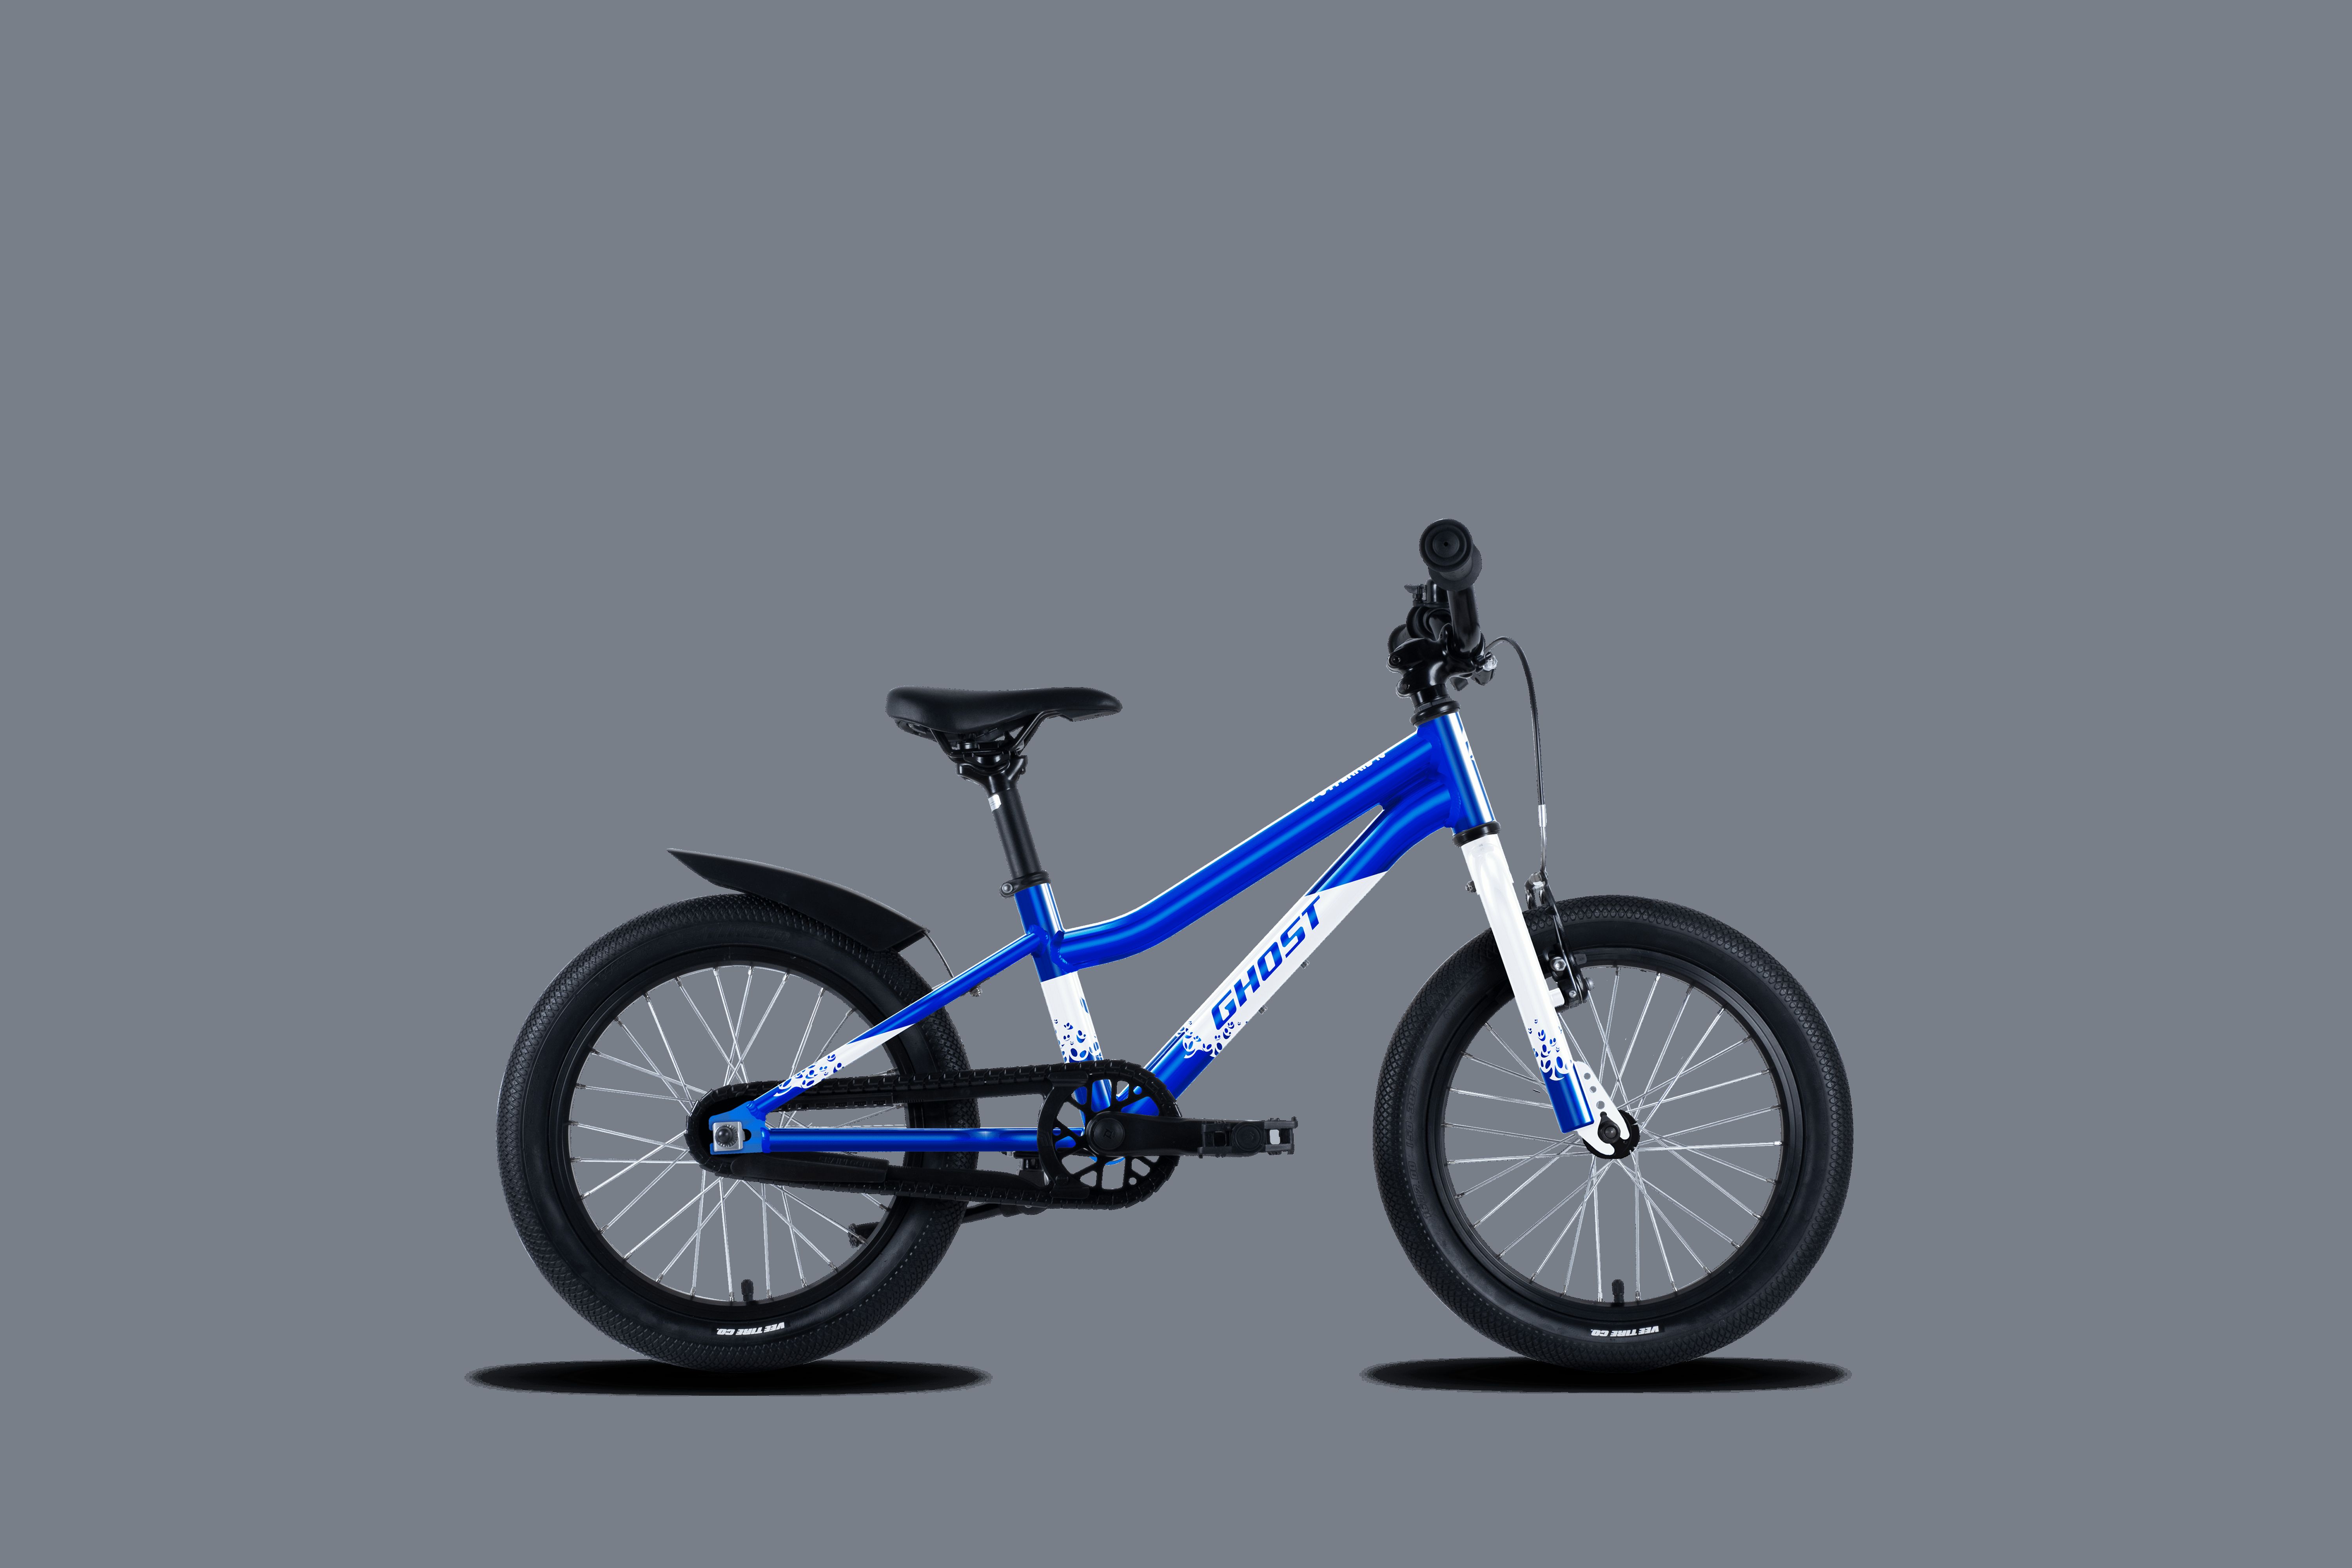 Ghost Powerkid 16 candy blue / pearl white glossy 2023 - Bicicleta